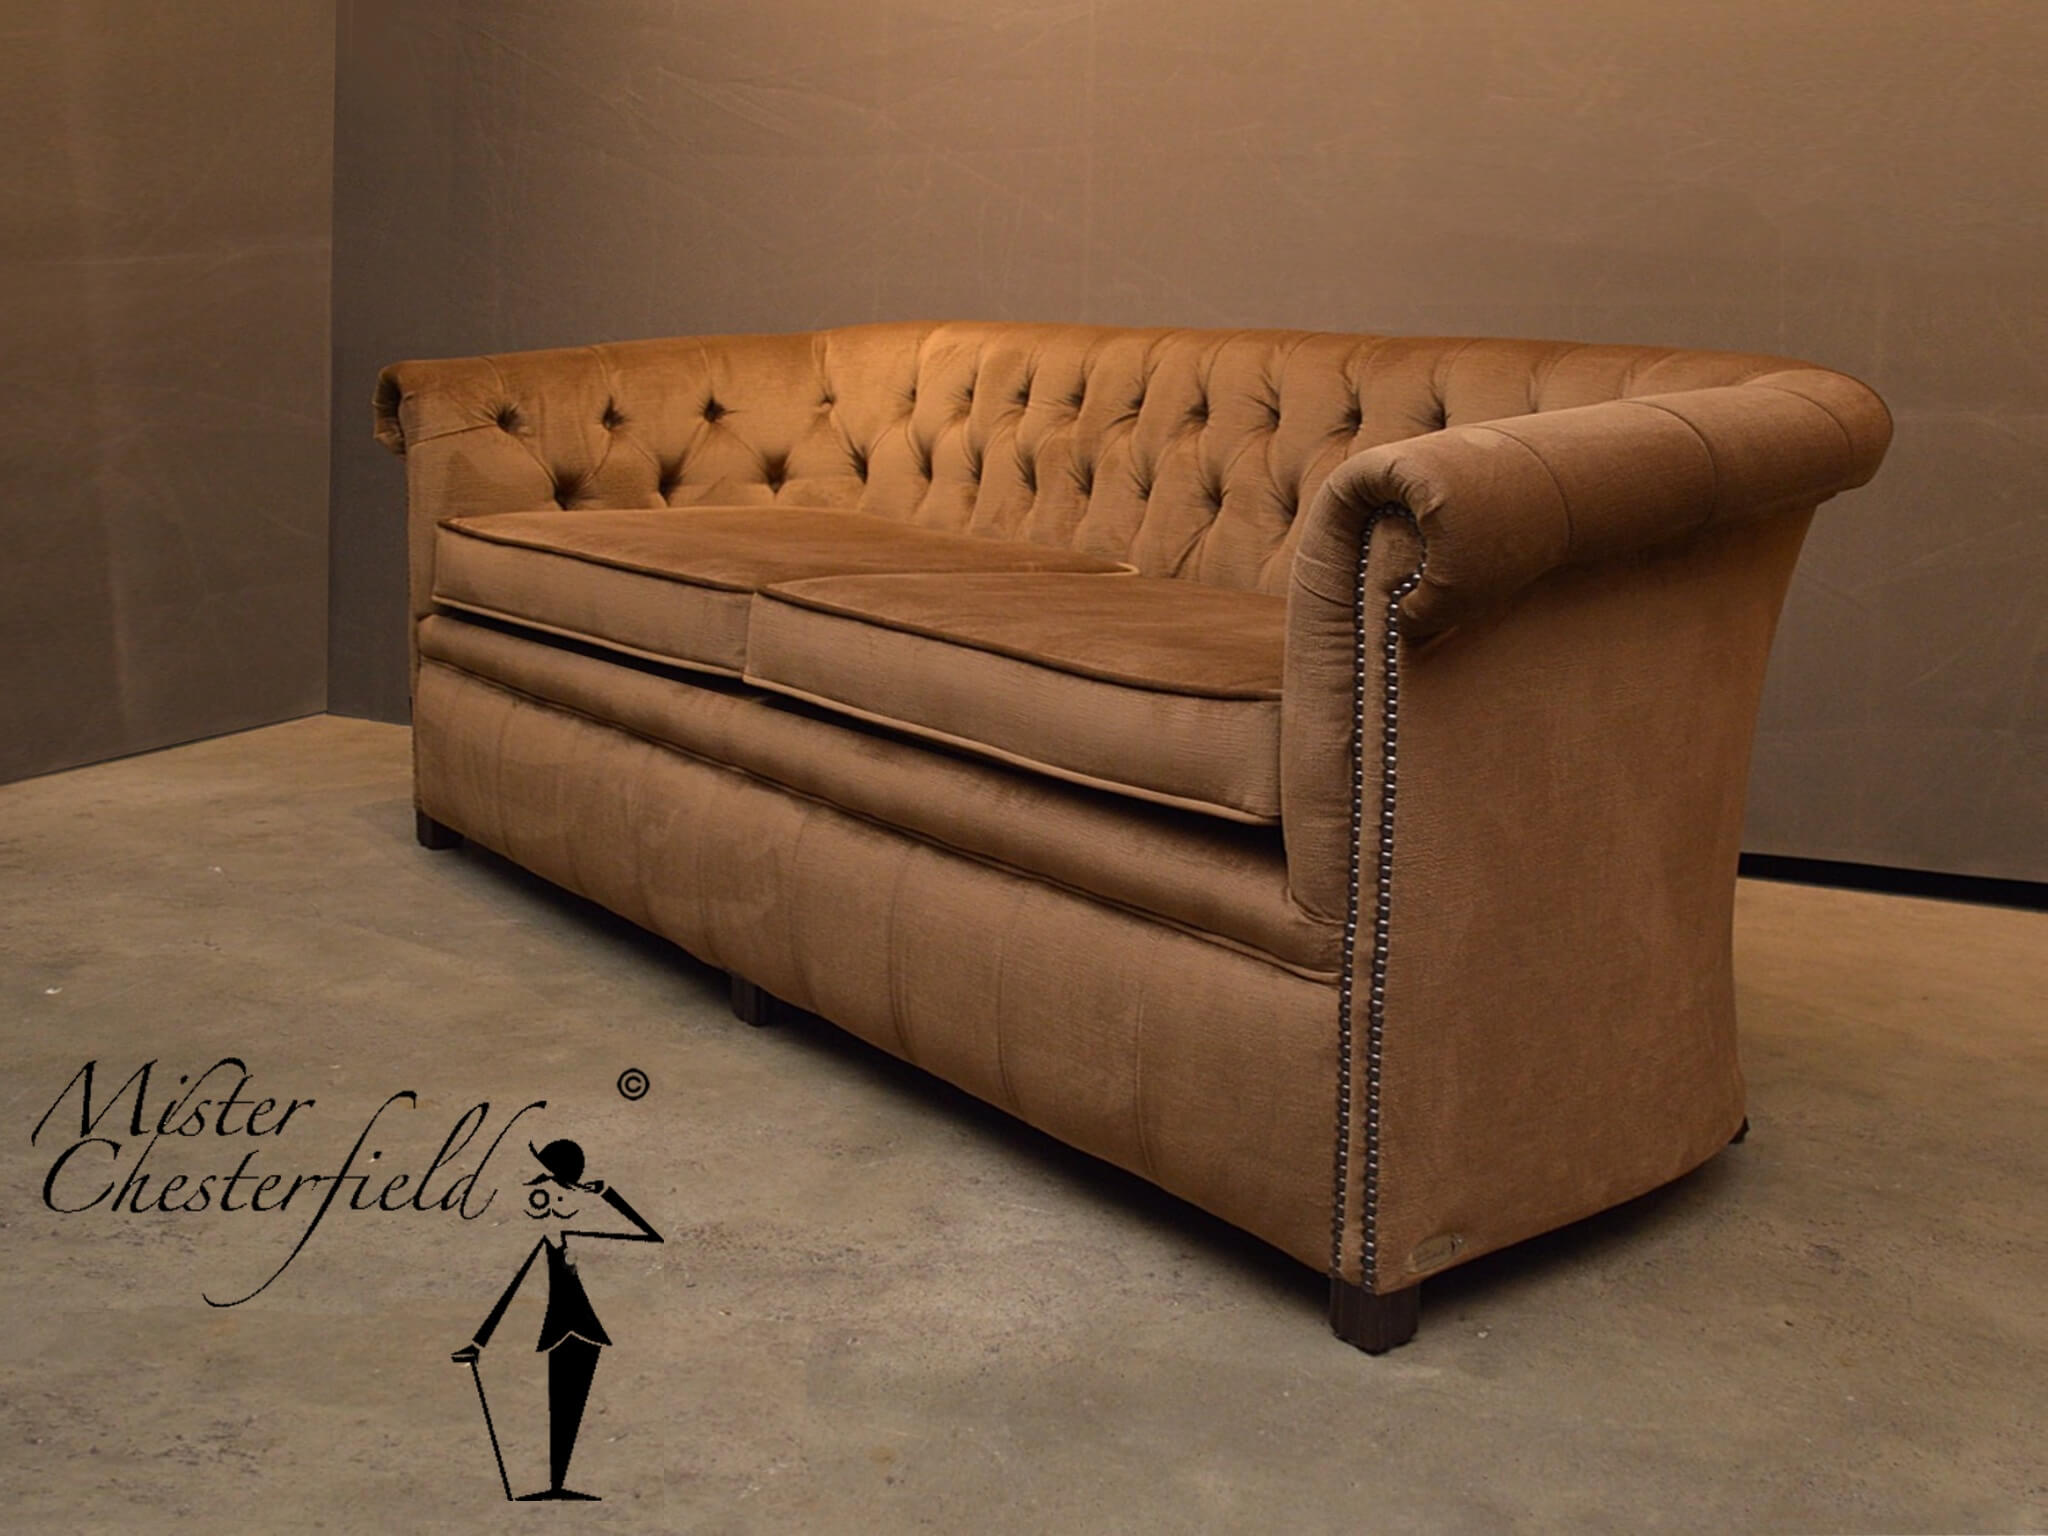 andrew-chesterfield-terciopelo-beige-taupe